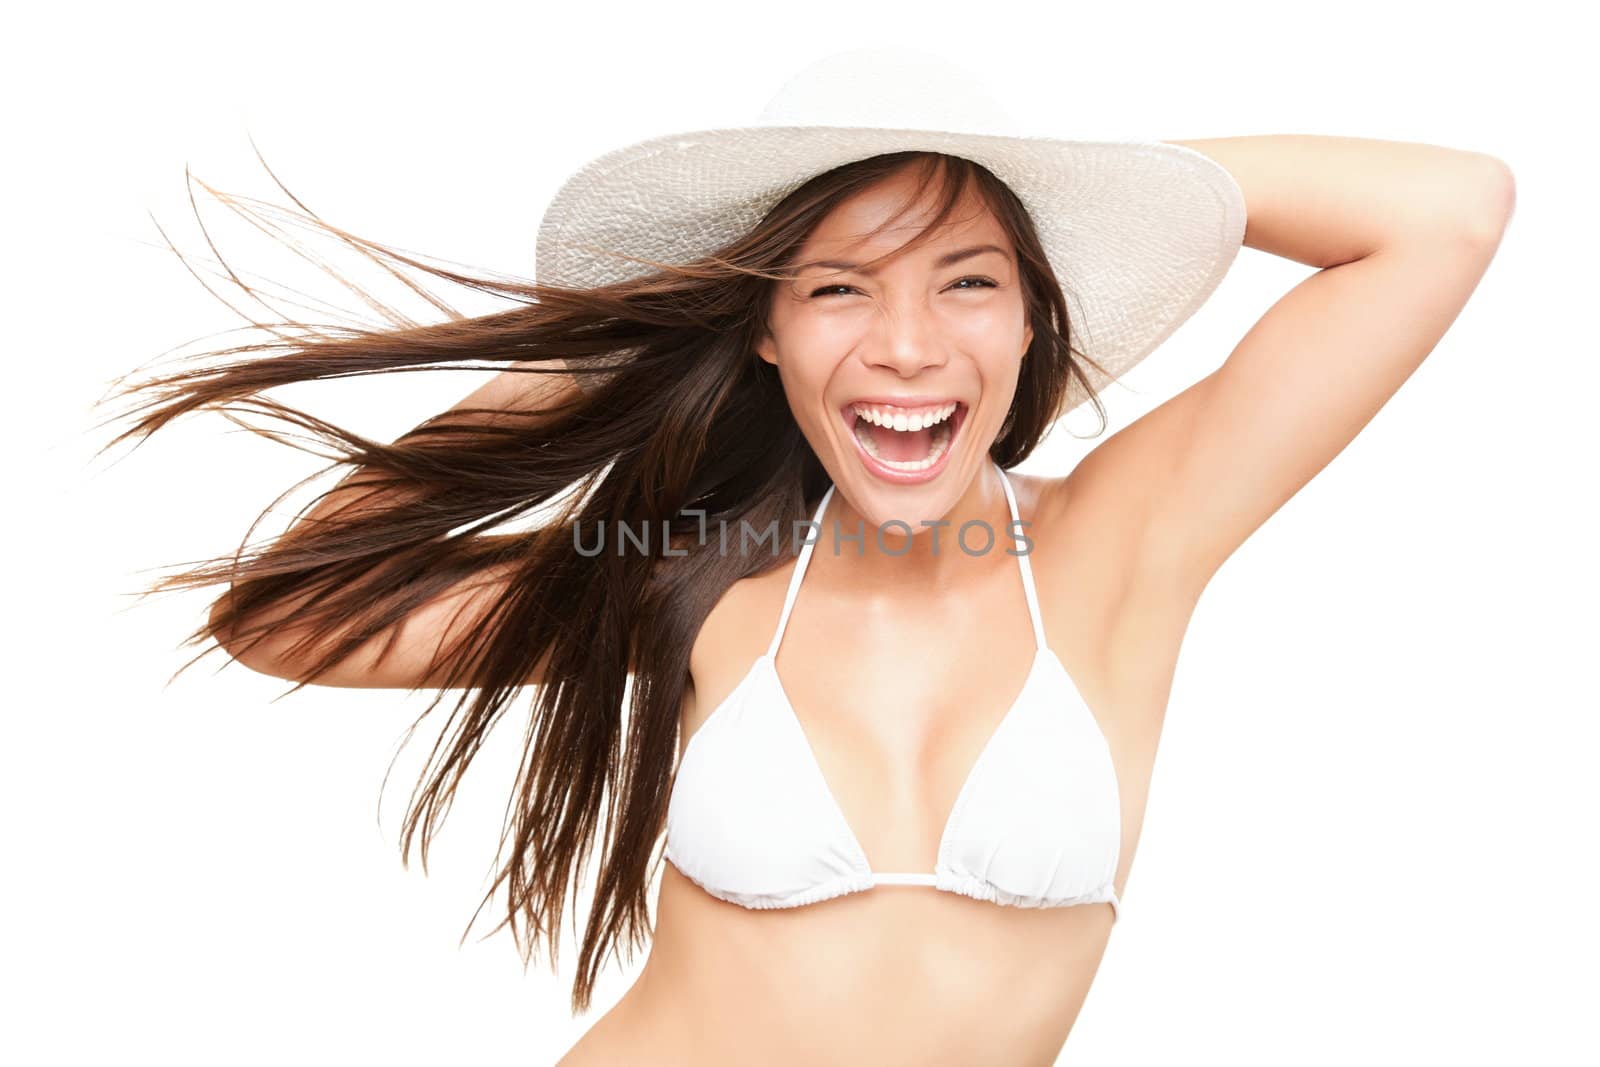 Summer bikini woman isolated in studio. Very energetic fresh portrait of young woman smiling in white bikini and beach hat. Beautiful mixed race Asian Caucasian model isolated on white background.